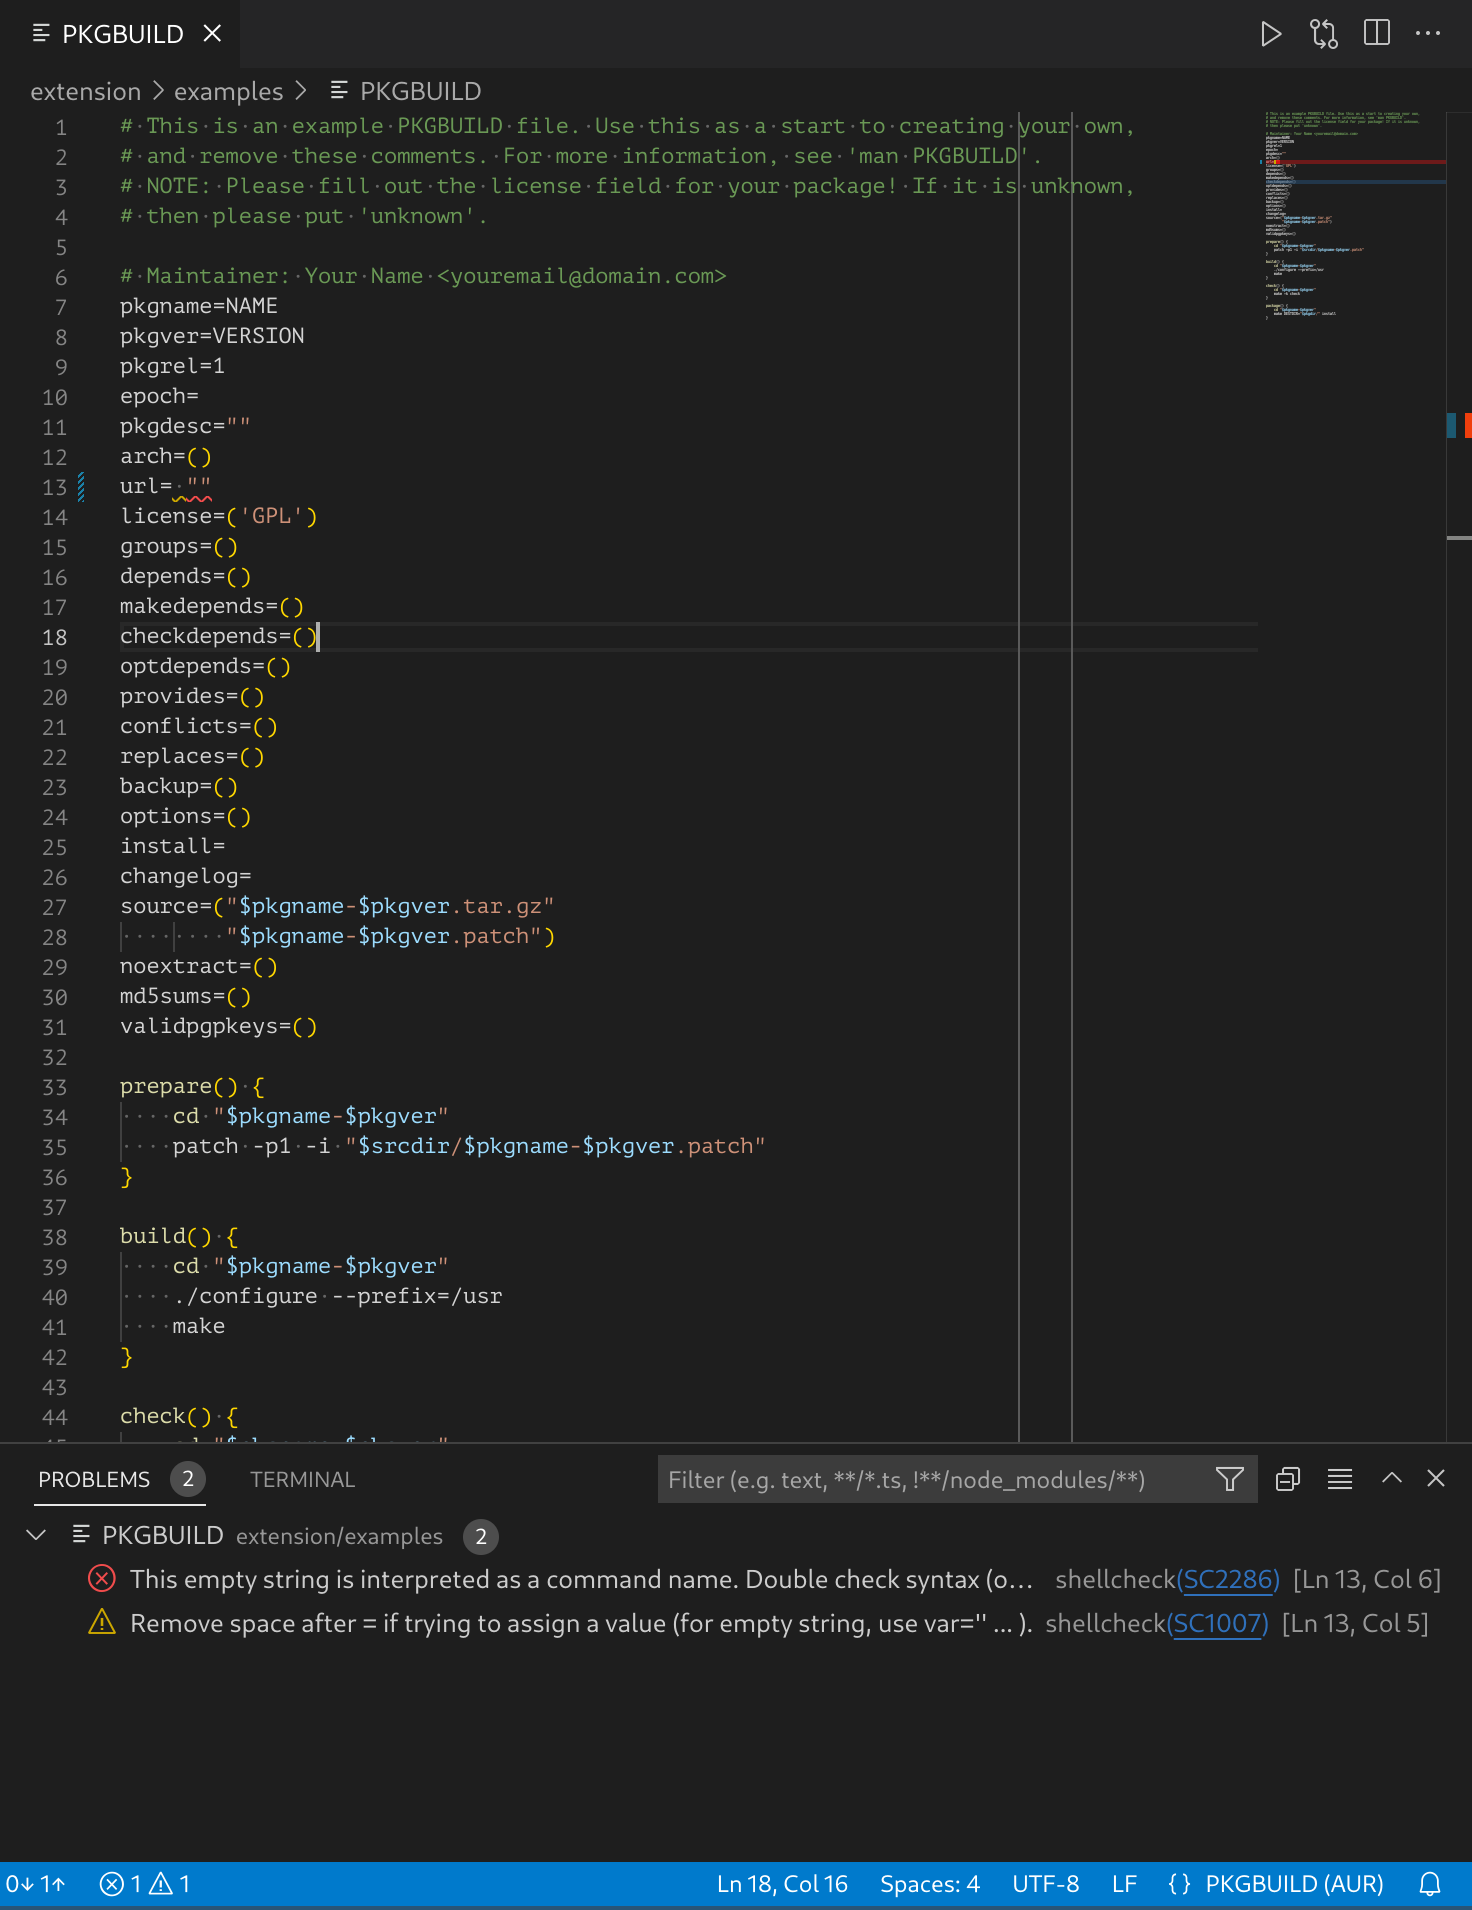 Screenshot of a PKGBUILD file opened in VS Code with the Packaging extension installed. The screenshot now only shows the two ShellCheck findings which are actual mistakes in the PKGBUILD.